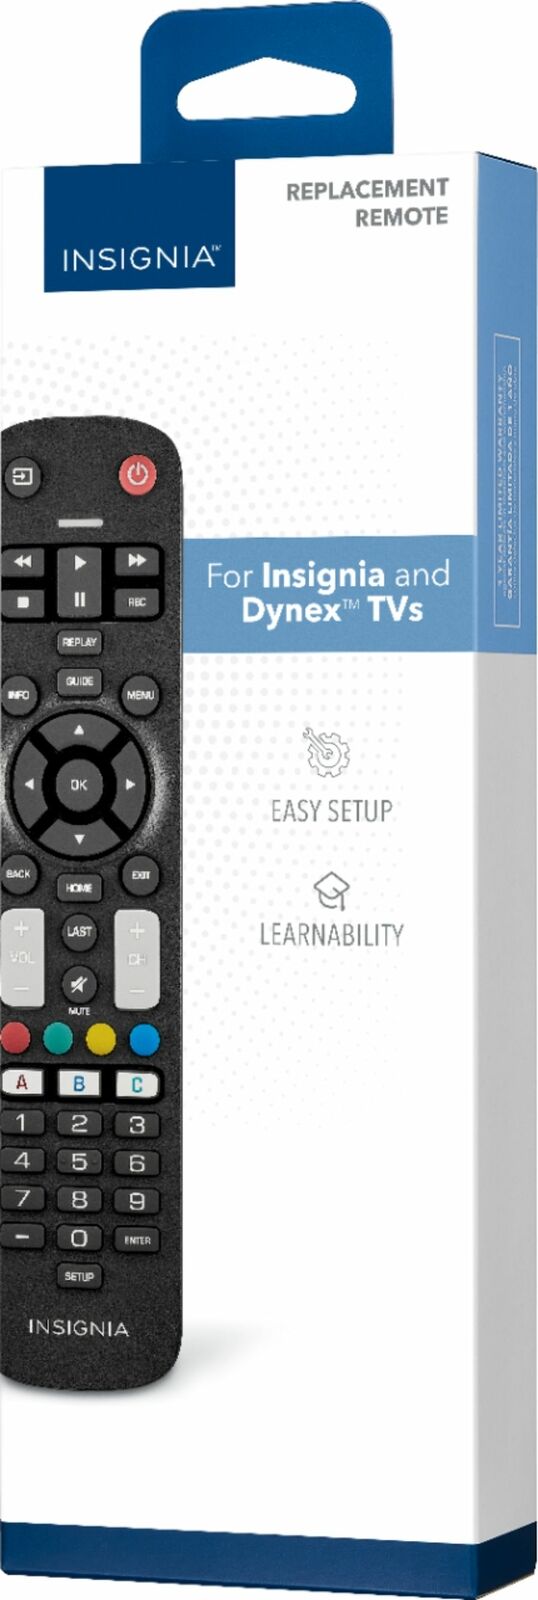 Insignia- Replacement Remote for Insignia and Dynex TVs - Black